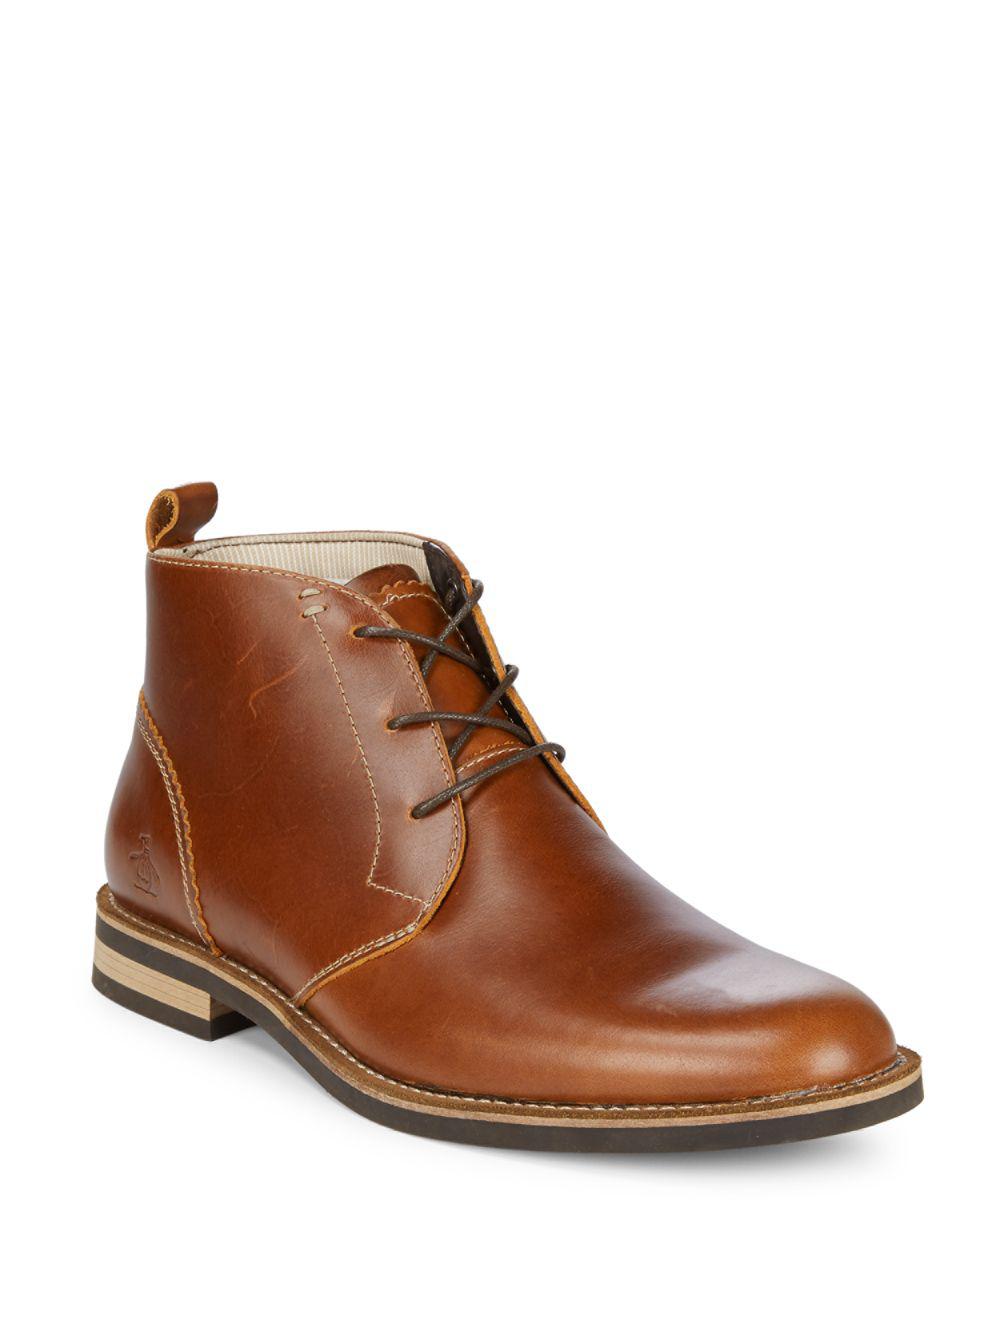 Original Penguin Monty Leather Chukka Boots in Brown for Men - Save 25% ...